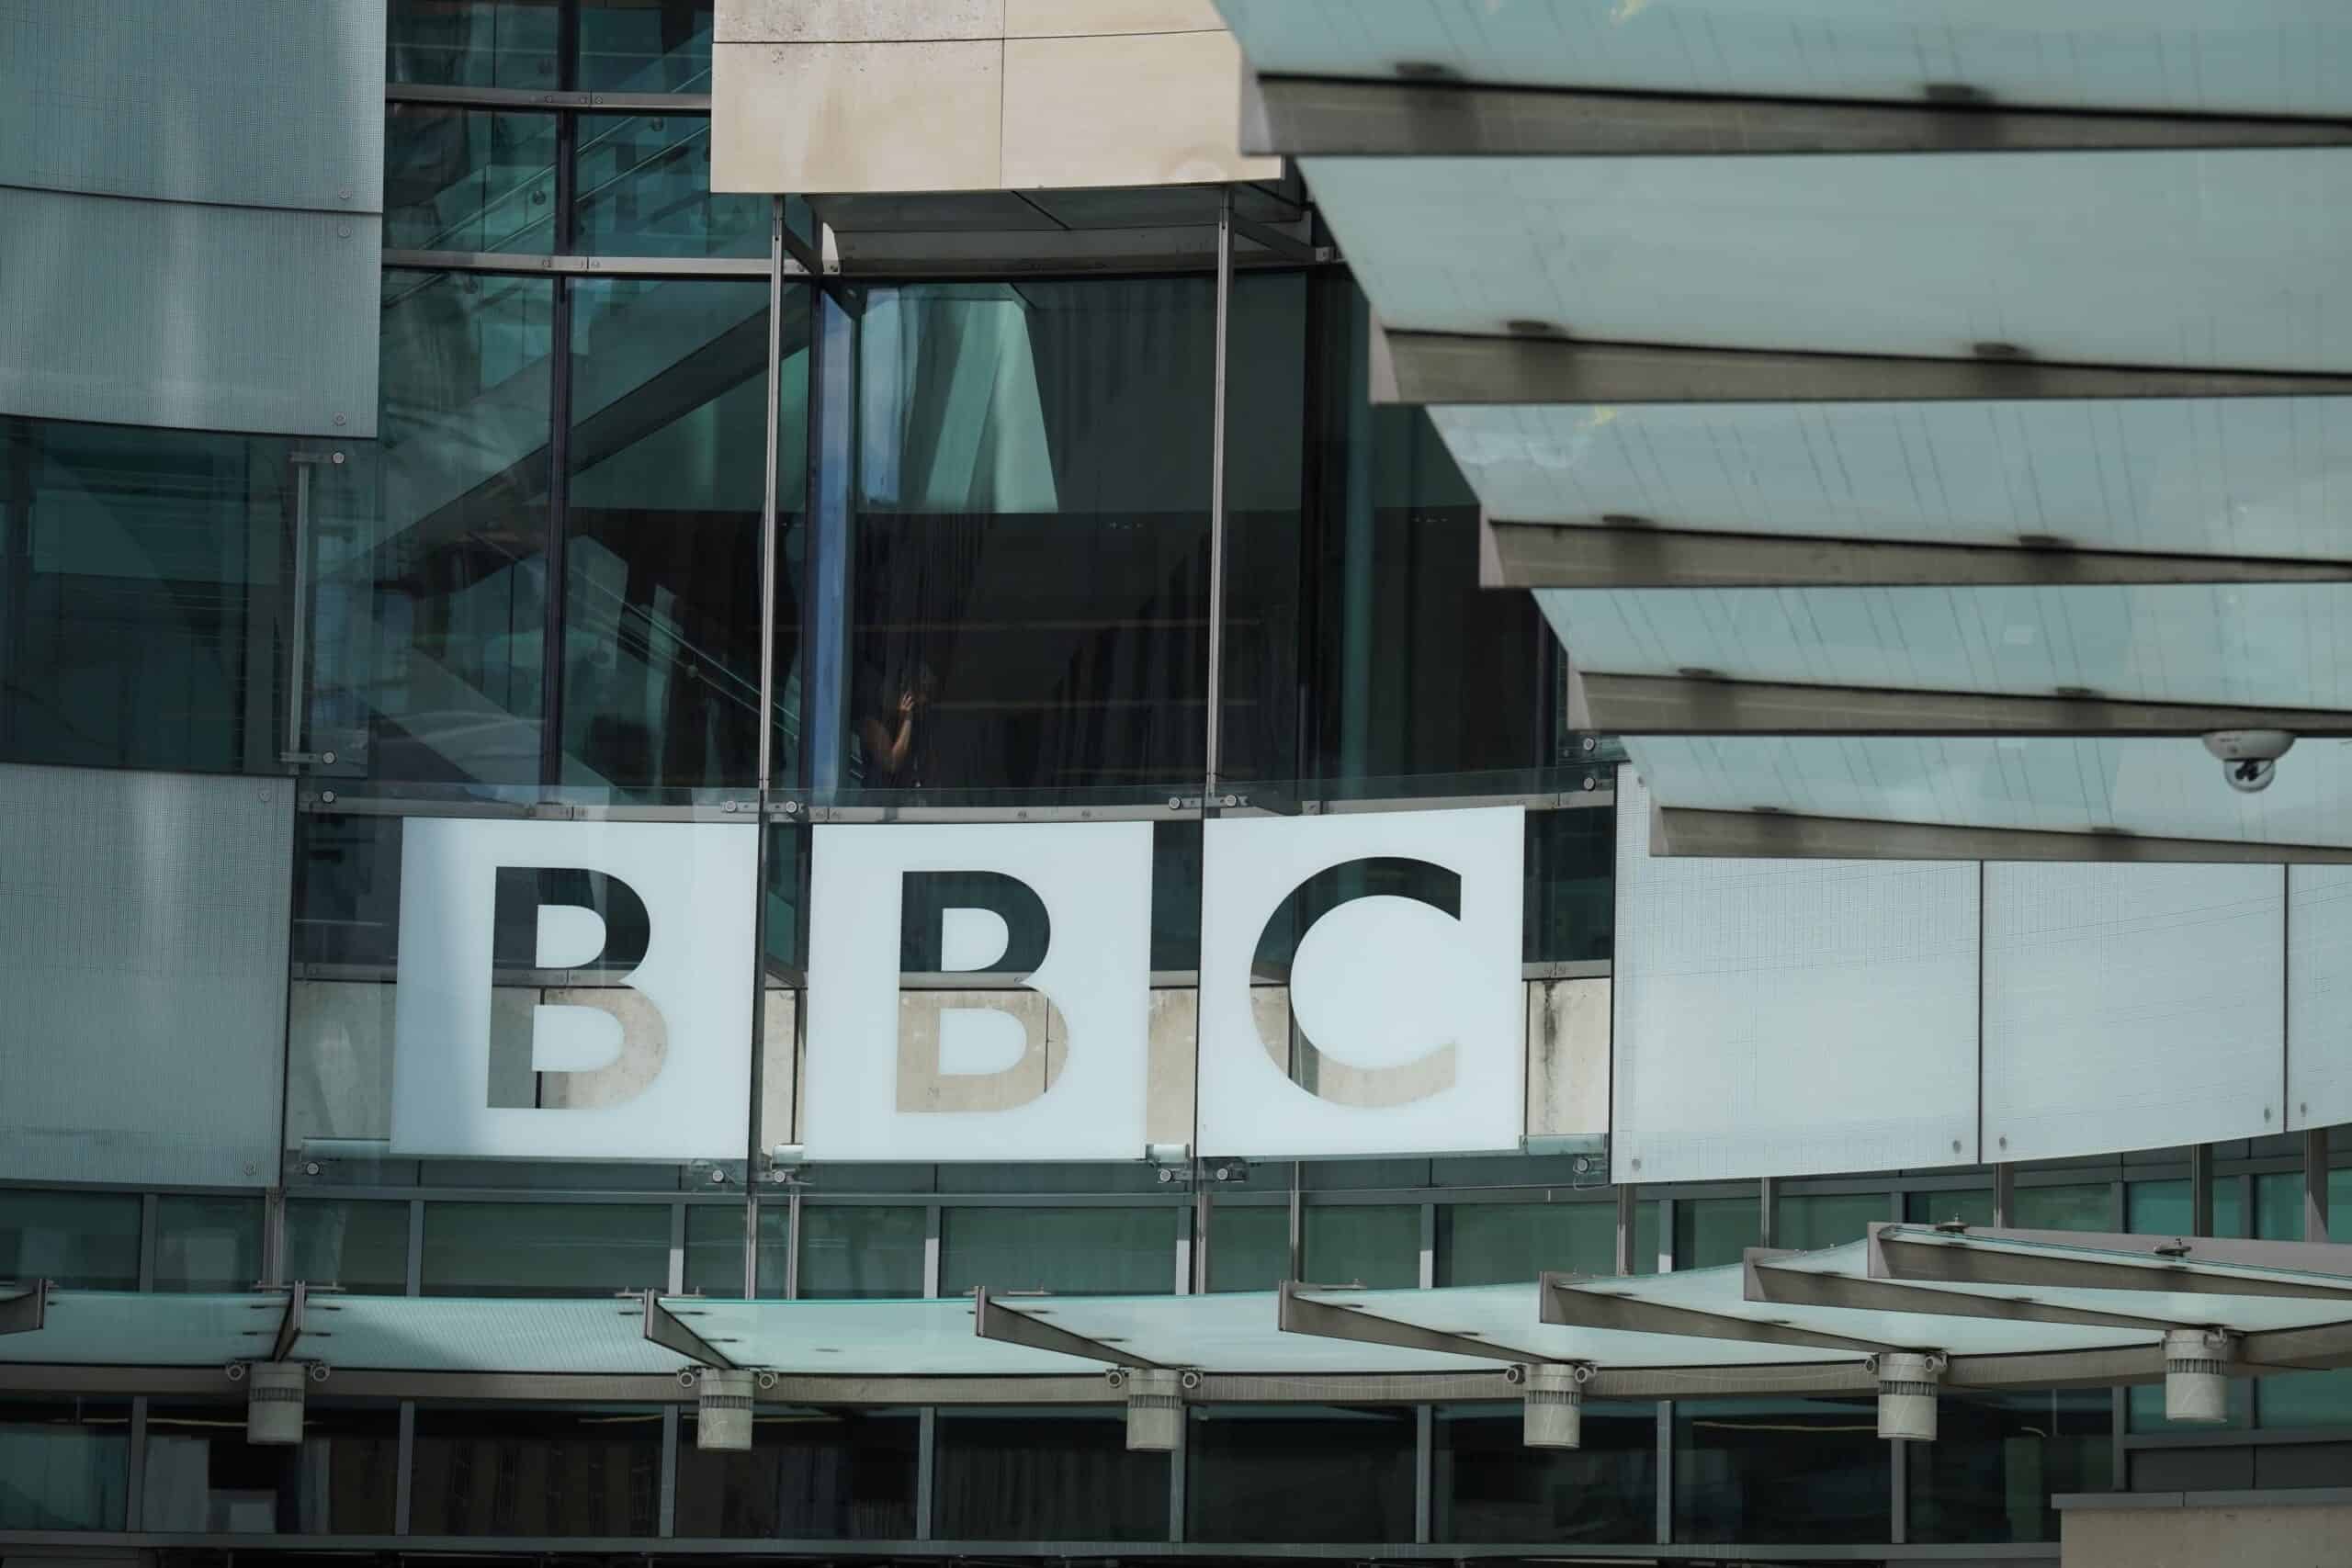 BBC recession spin prompts bemused reaction